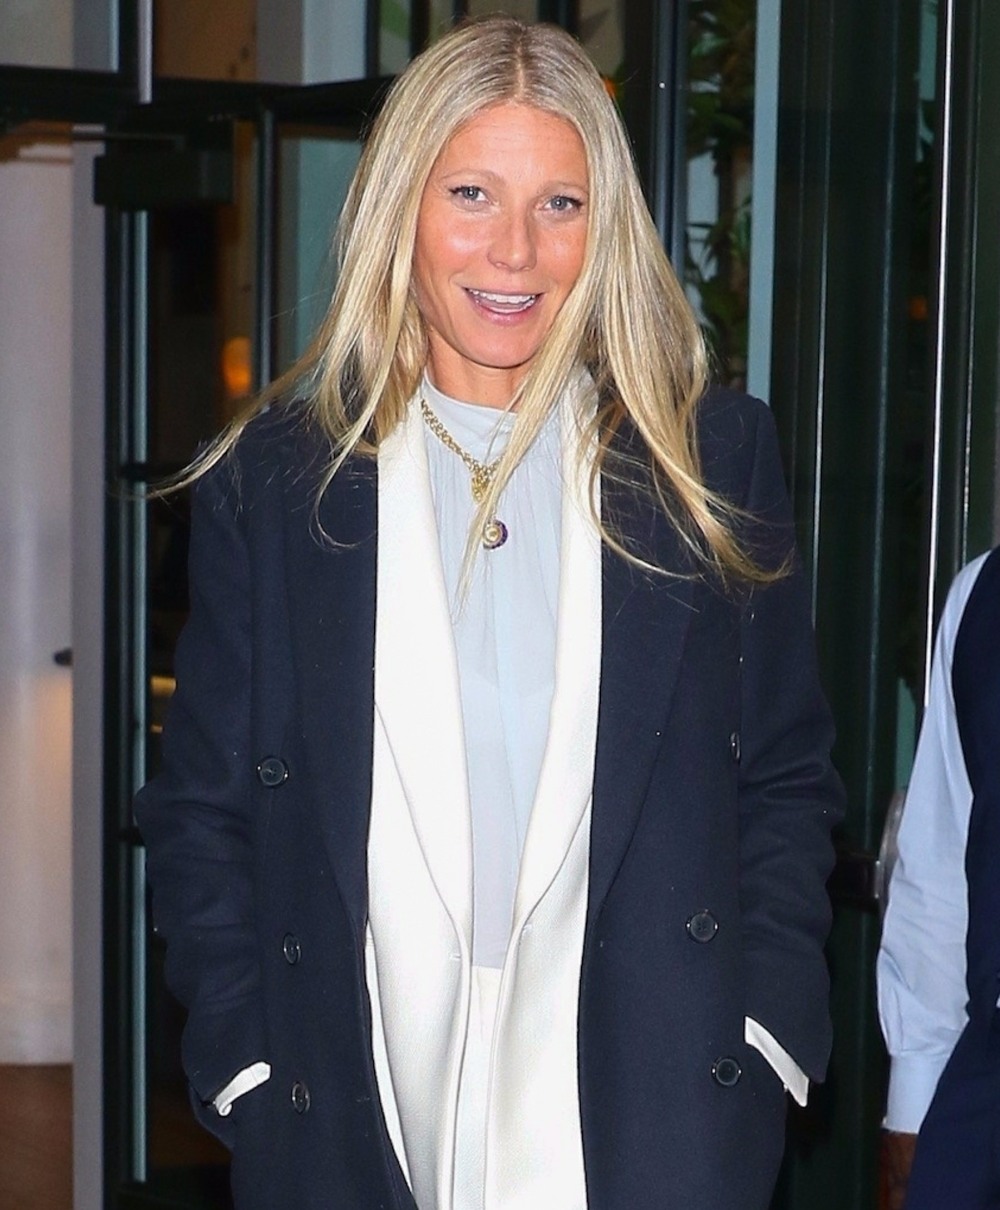 Gwyneth Paltrow heads to 'The Tonight Show Starring Jimmy Fallon' from the Whitby Hotel